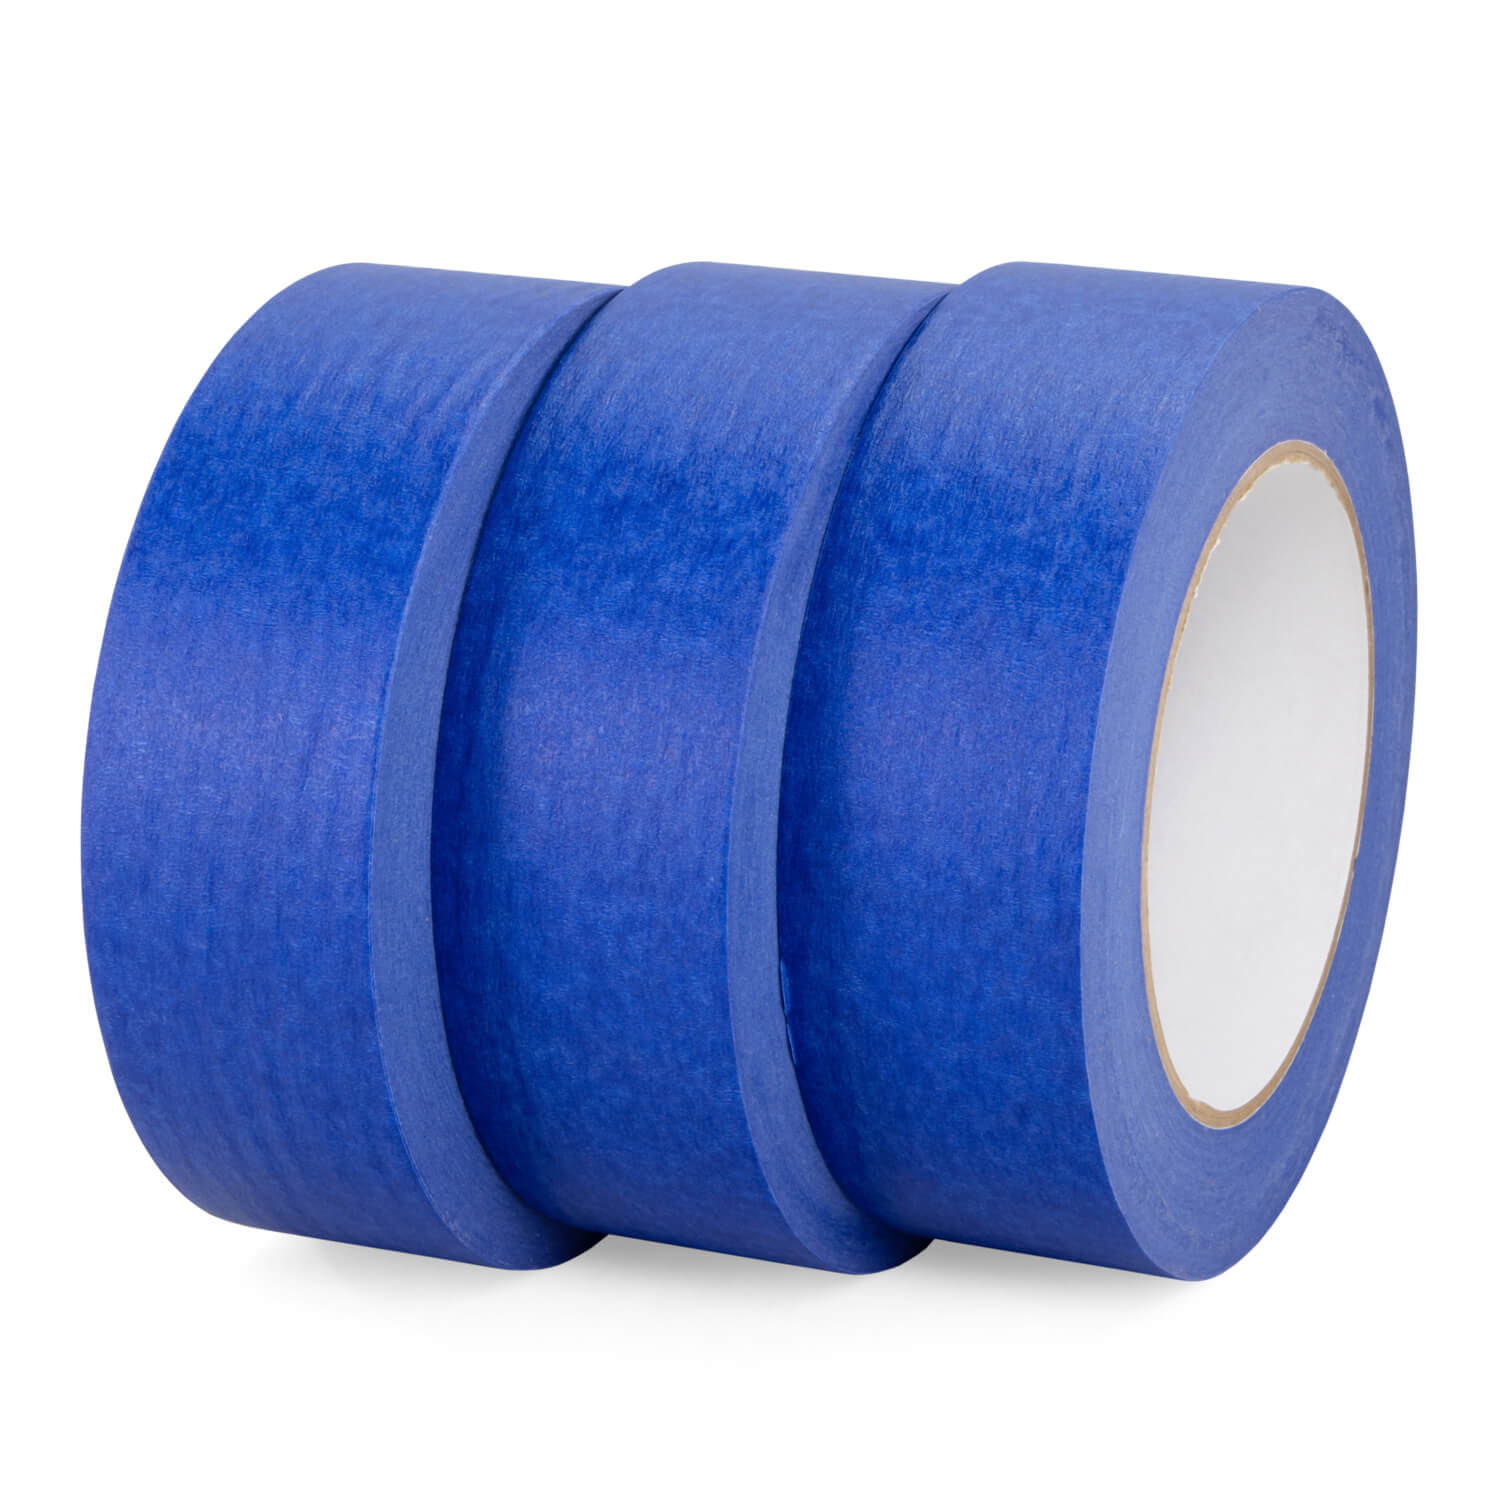 1 1/2 x 60 yards Blue Painters Tape for Painting, Natural Rubber buy in  stock in U.S. in IDL Packaging